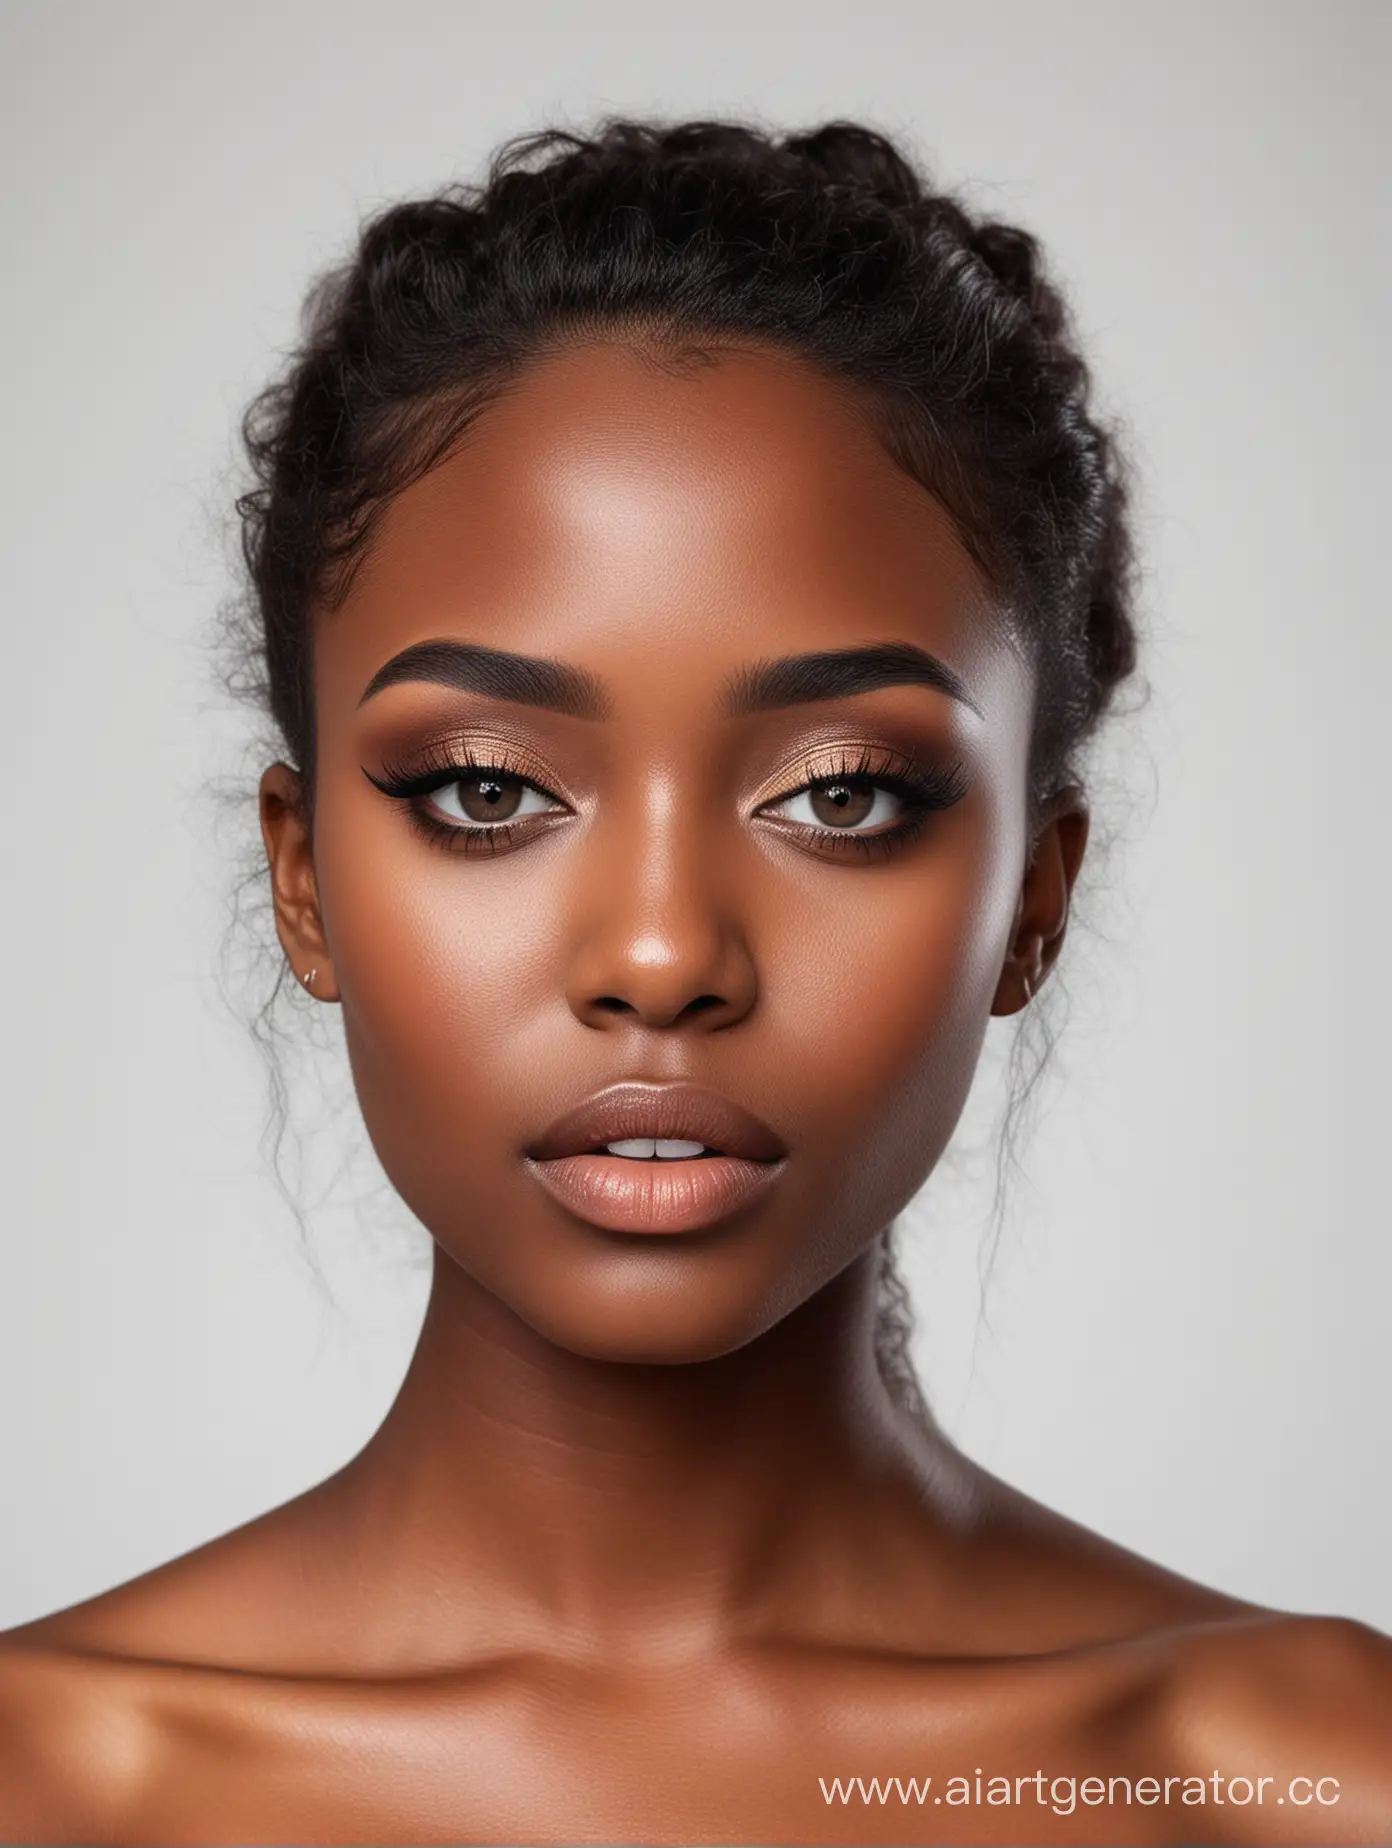 DarkSkinned-Girl-with-Aesthetic-Makeup-on-White-Background